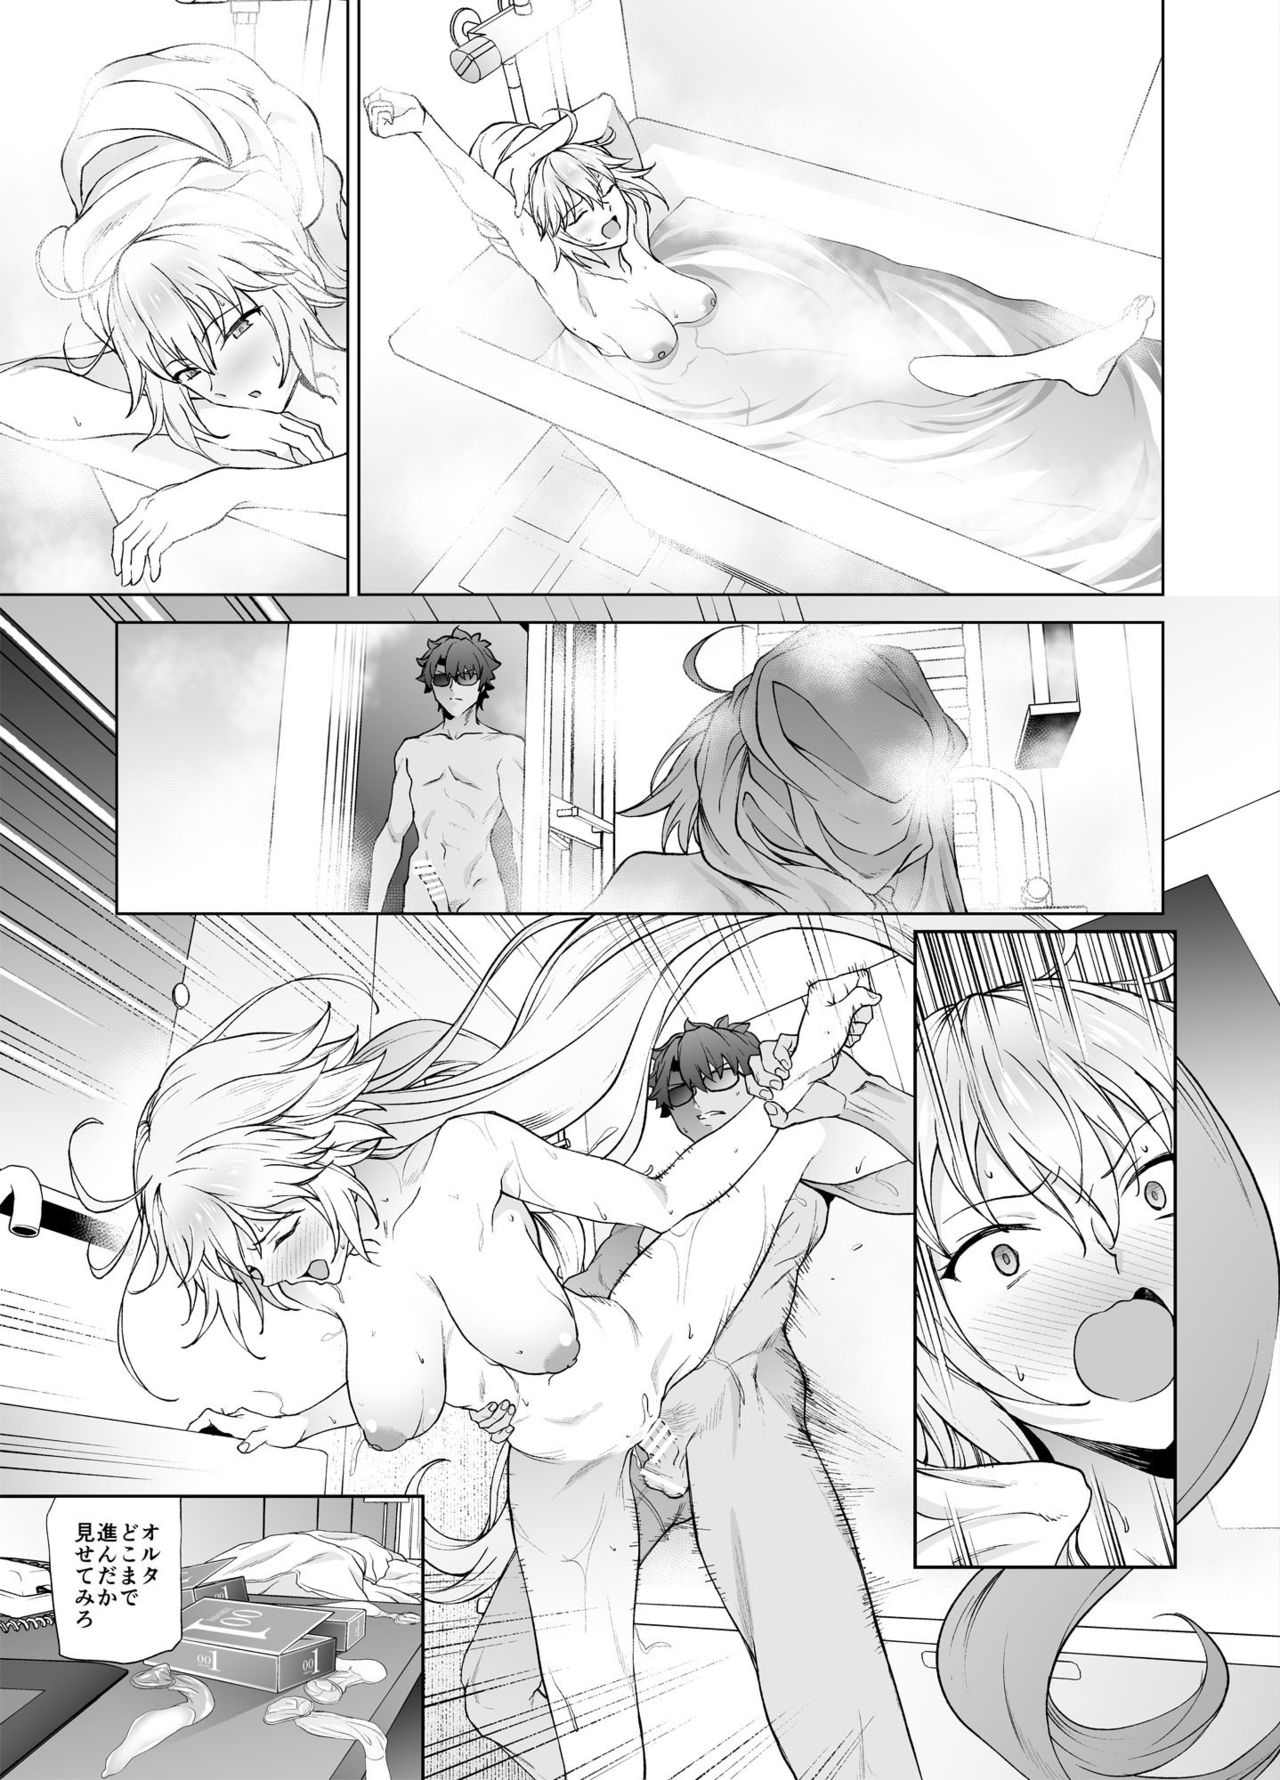 [EXTENDED PART (Endo Yoshiki)] Jeanne W (Fate/Grand Order) [Digital] page 24 full